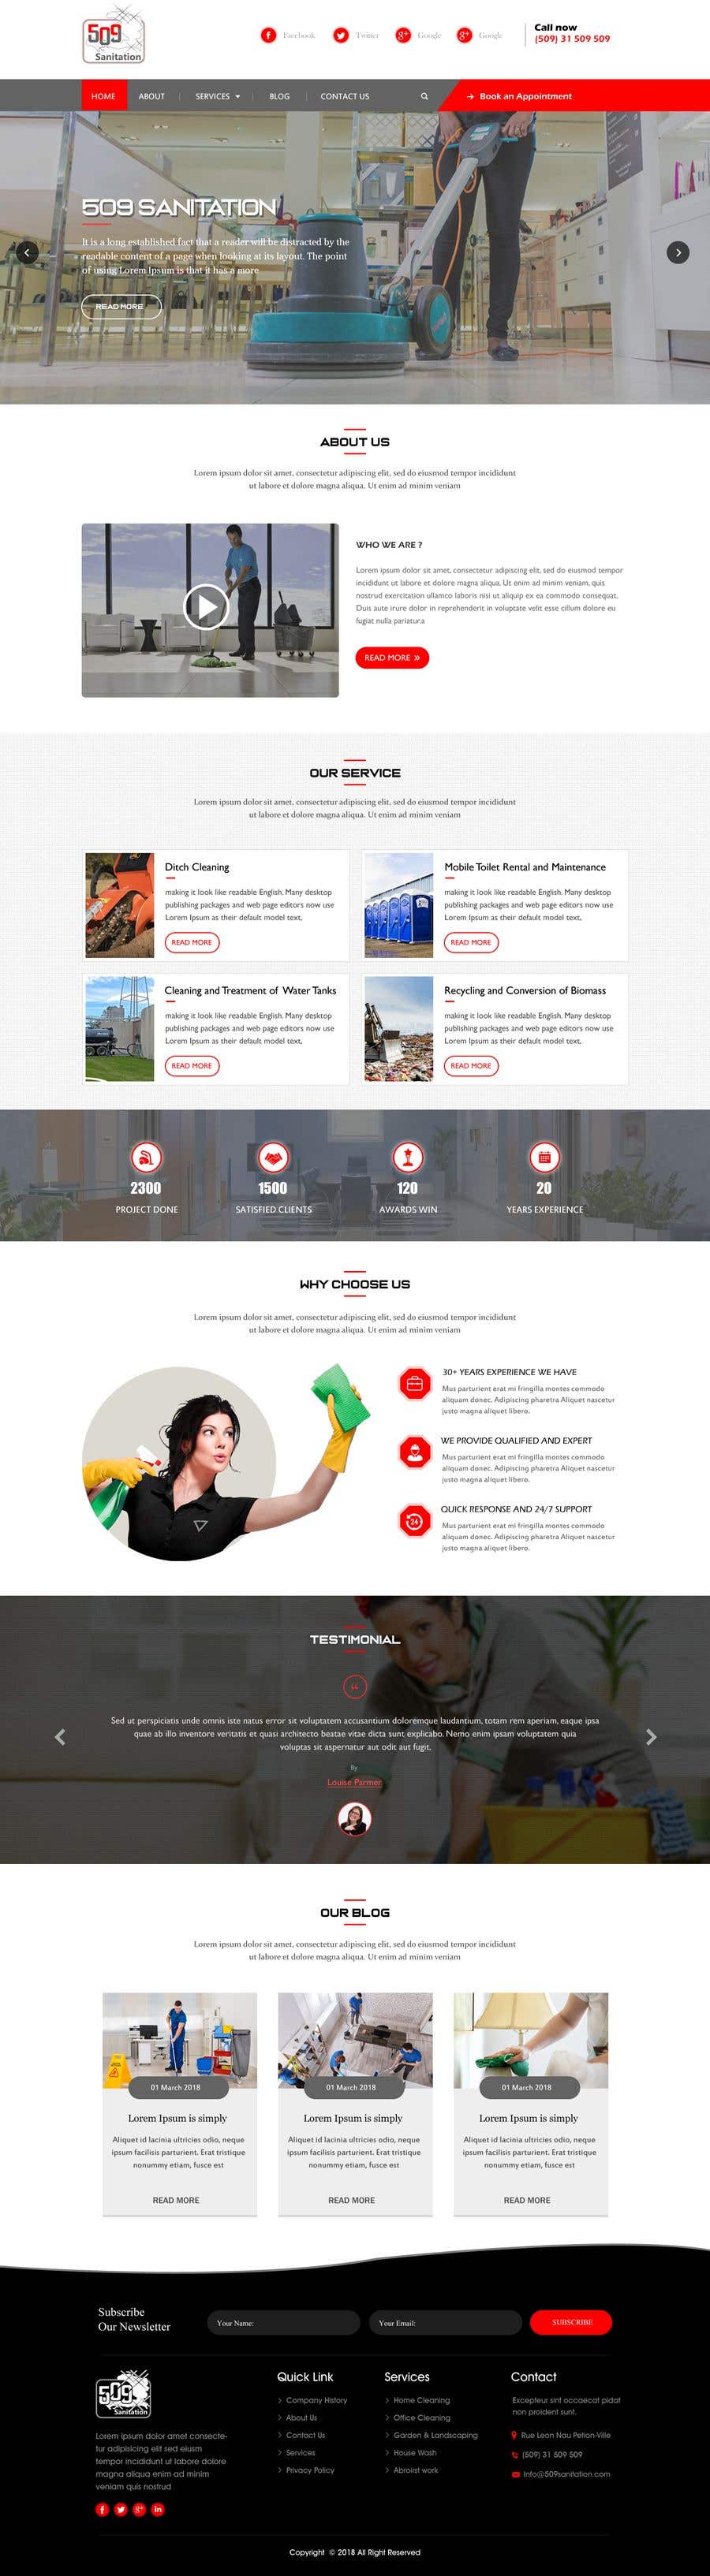 Proposition n°9 du concours                                                 Design a One Page Website for a cleaning Company Service
                                            